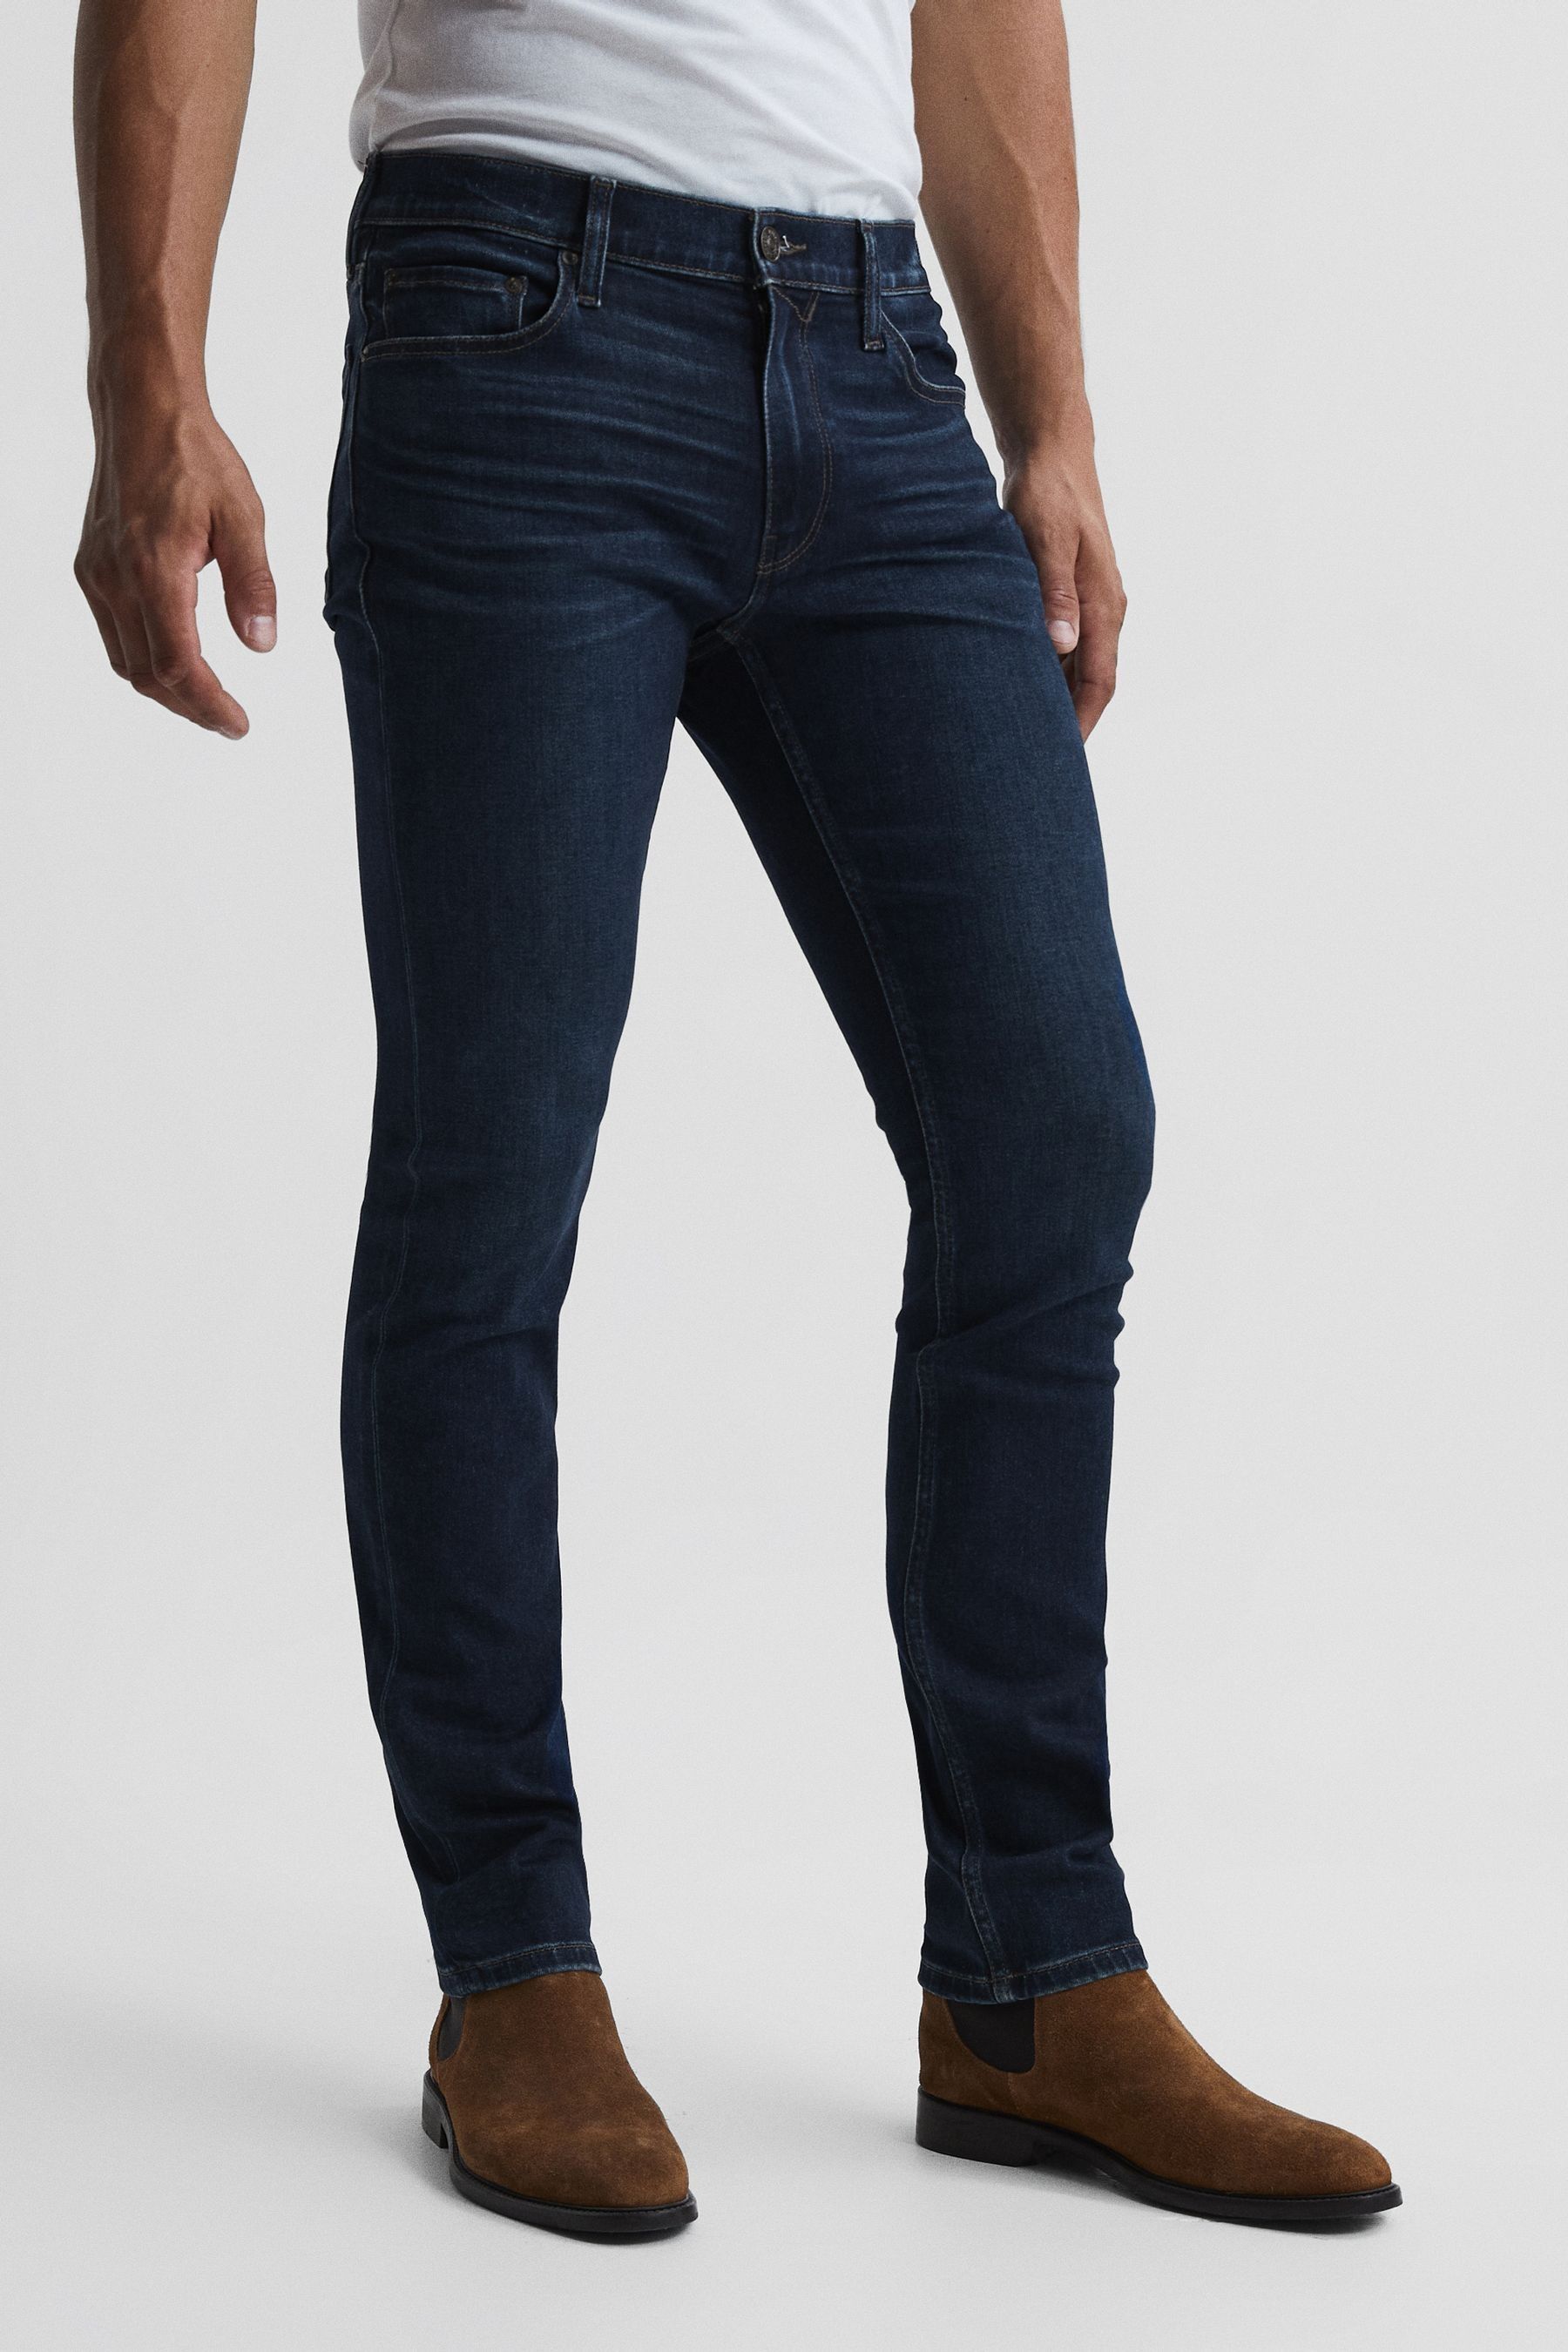 PAIGE GIRARD LENNOX PAIGE HIGH STRETCH SLIM FIT JEANS